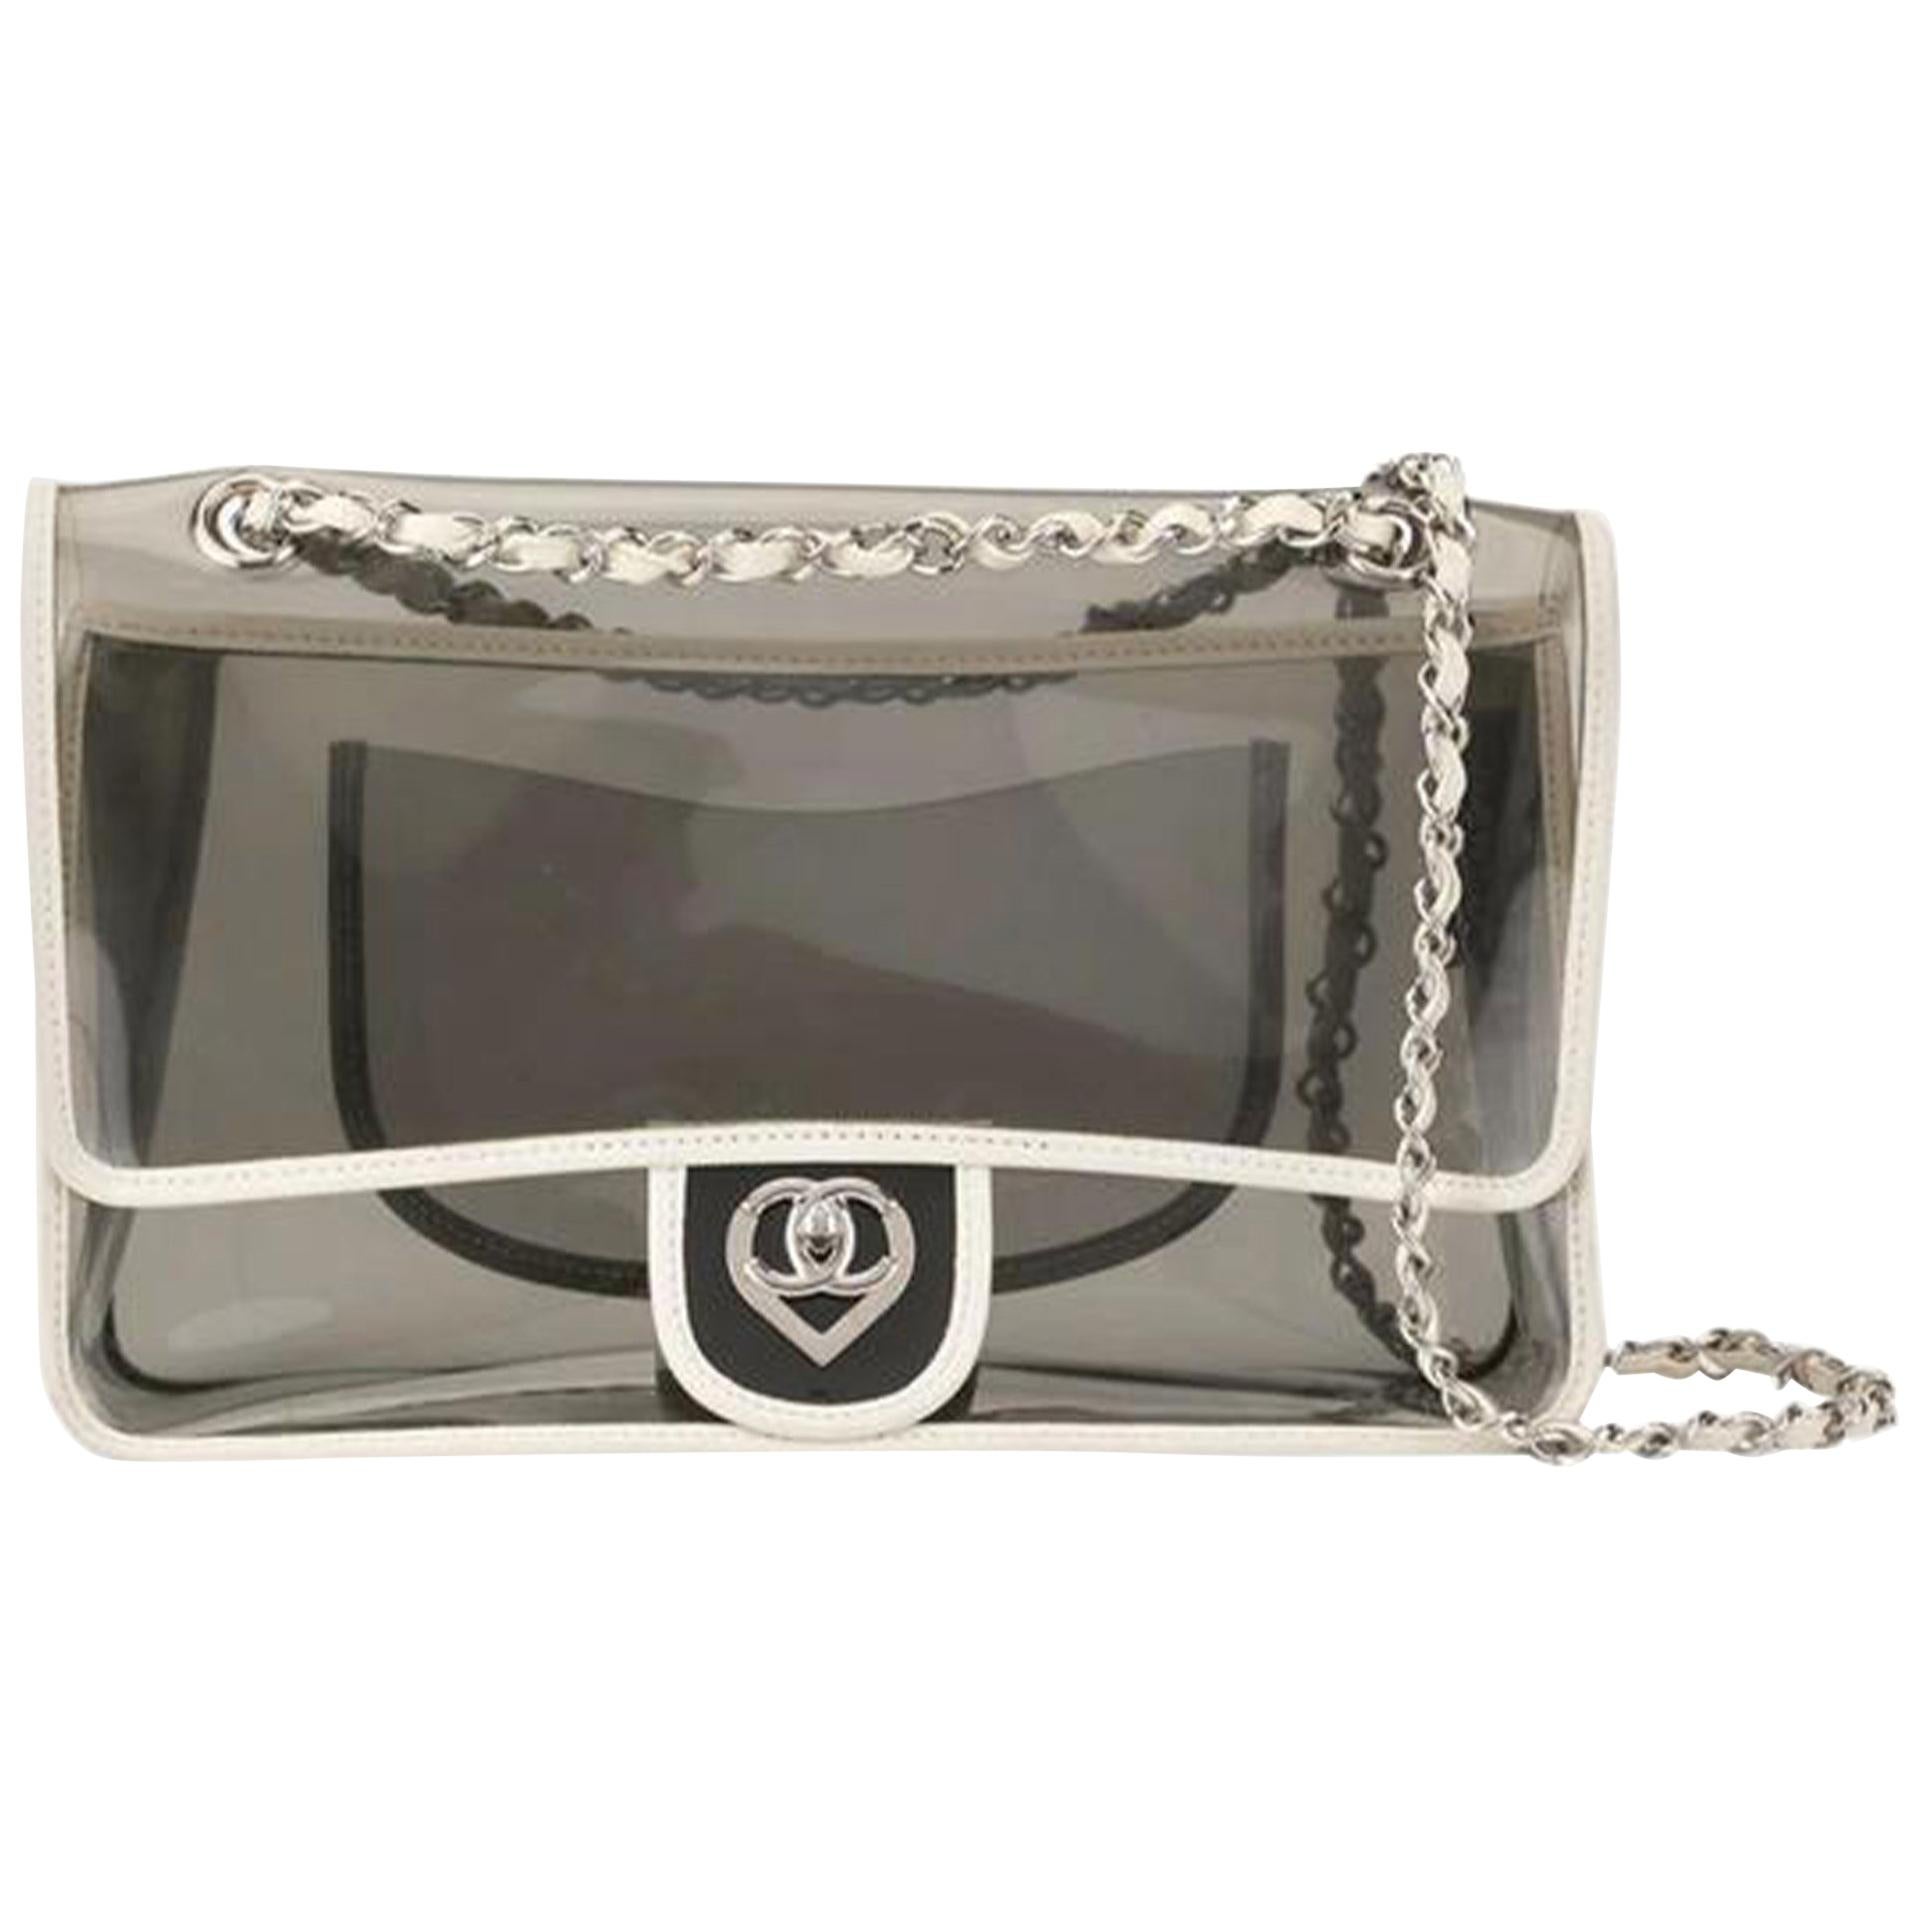 Chanel 2.55 Reissue Transparent Classic Heart Flap Vintage White Grey Clear Bag